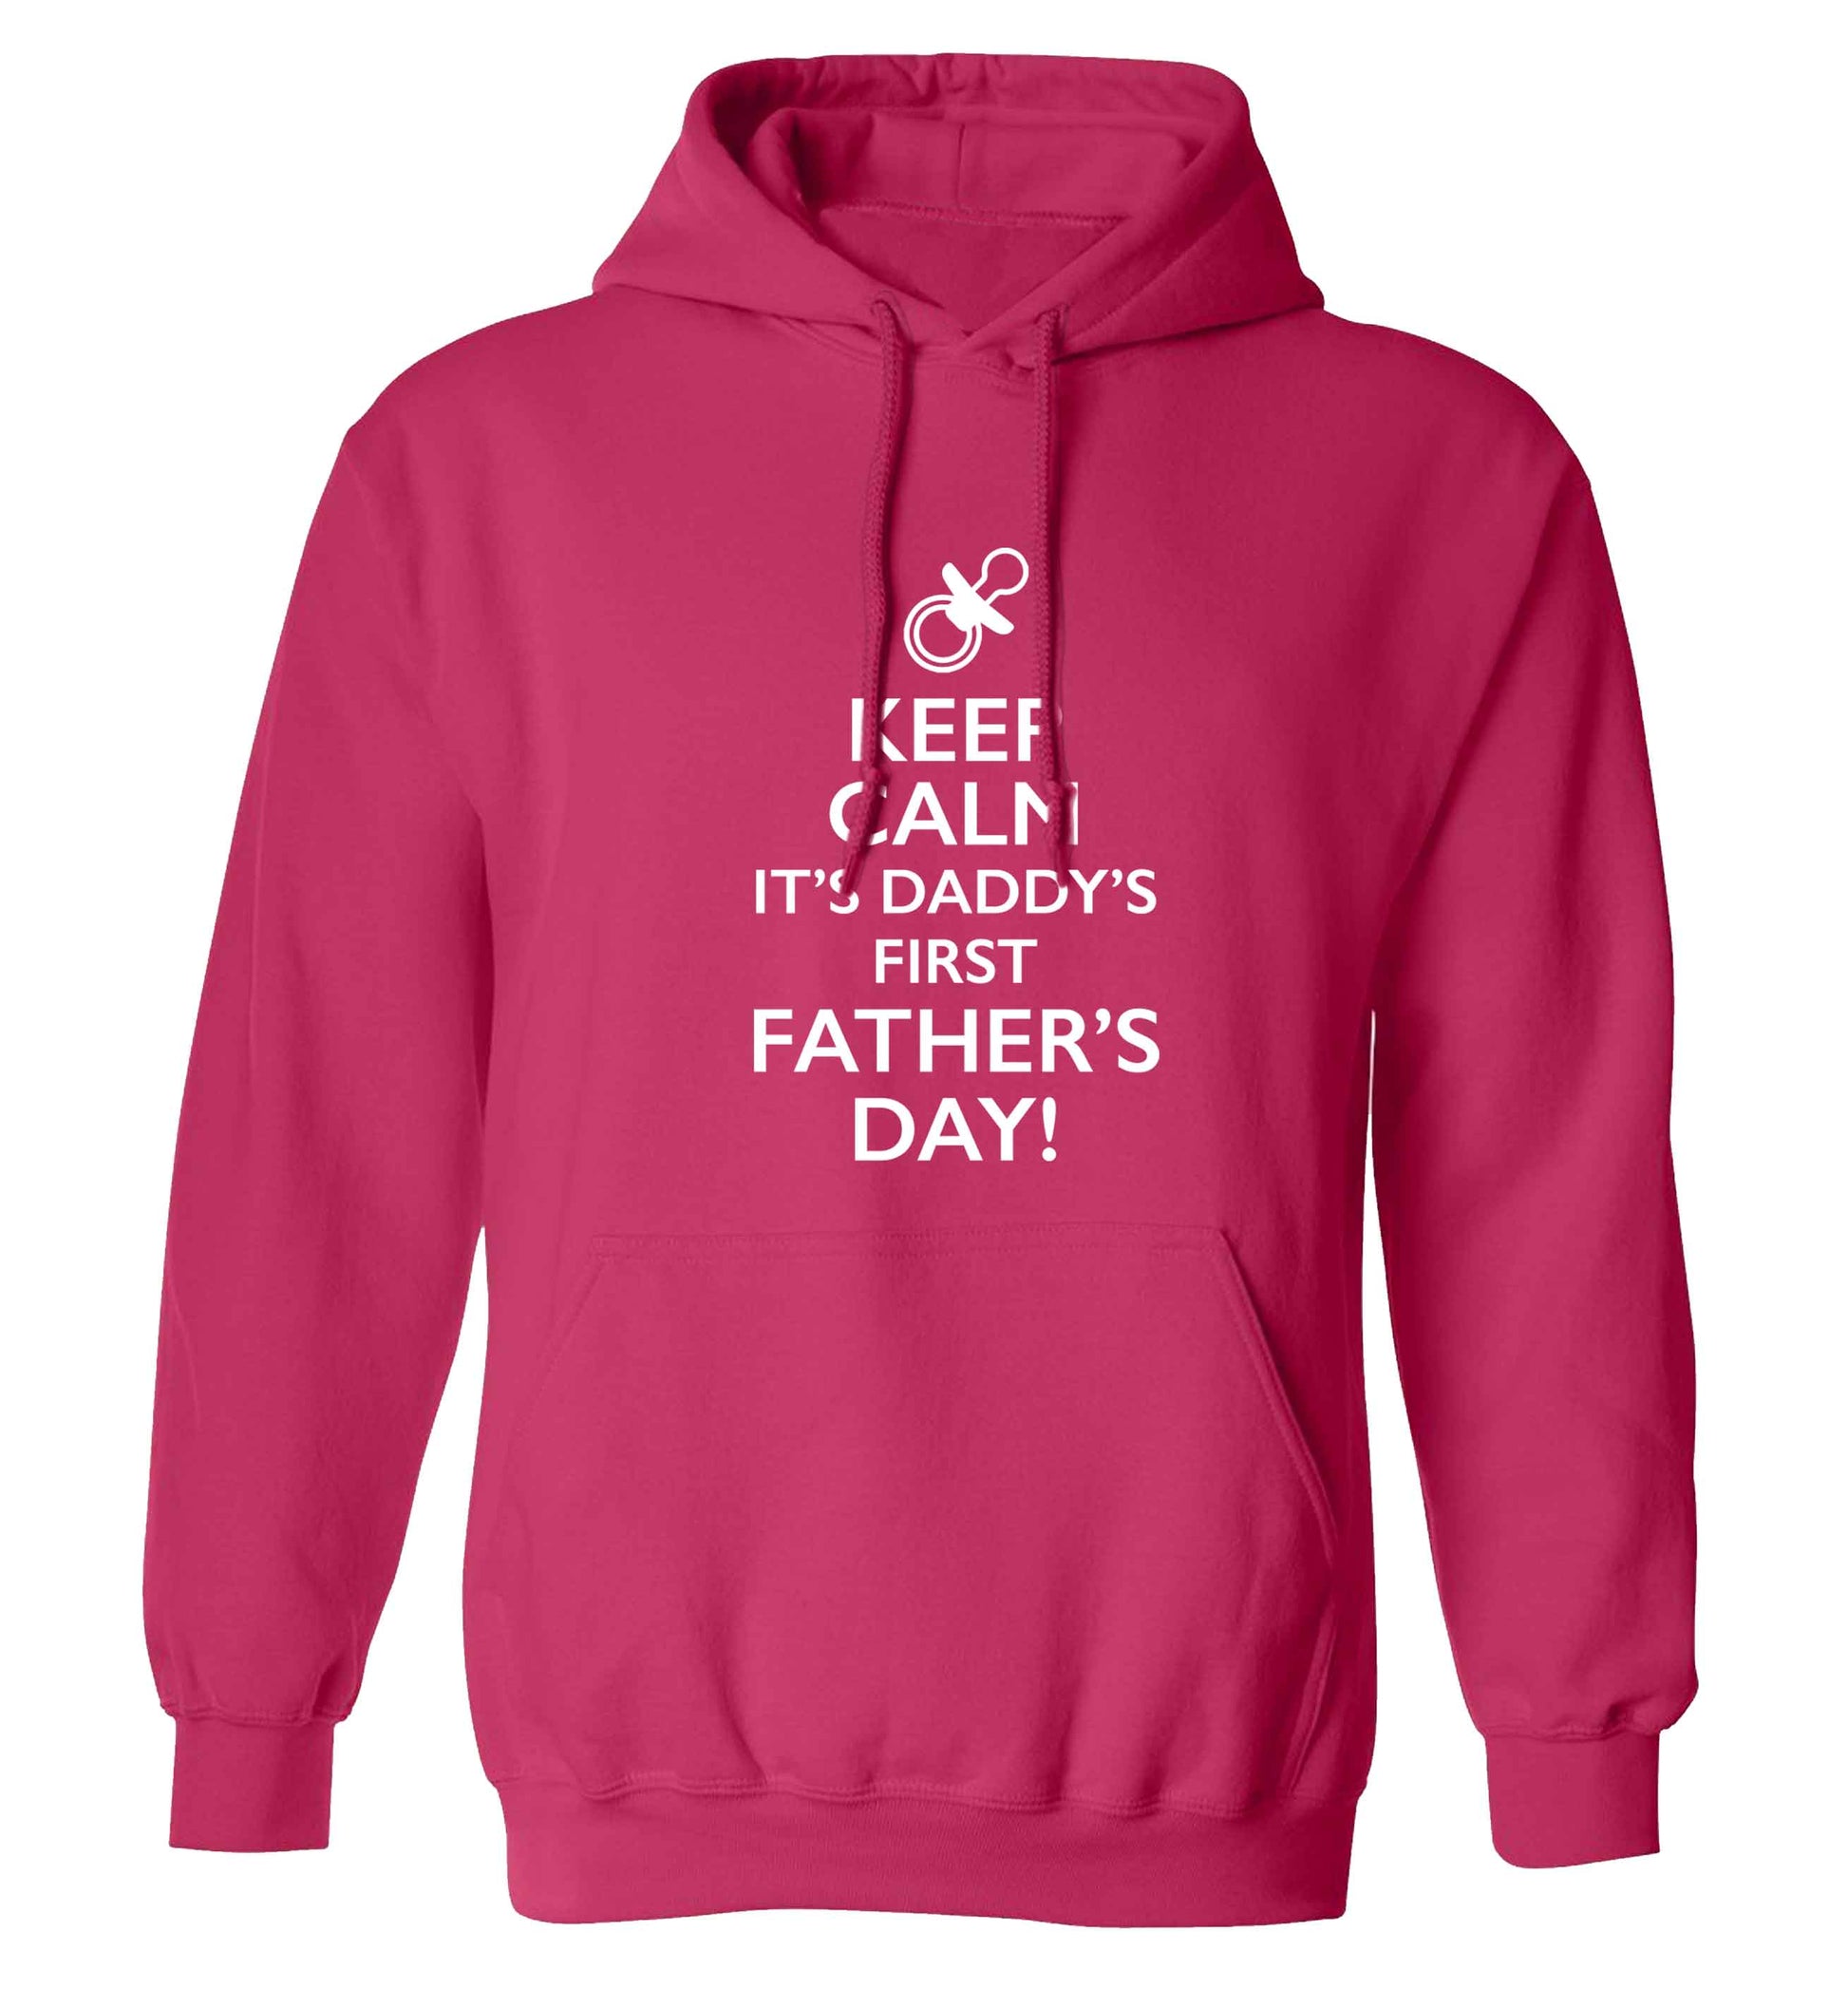 Keep calm it's daddys first father's day adults unisex pink hoodie 2XL